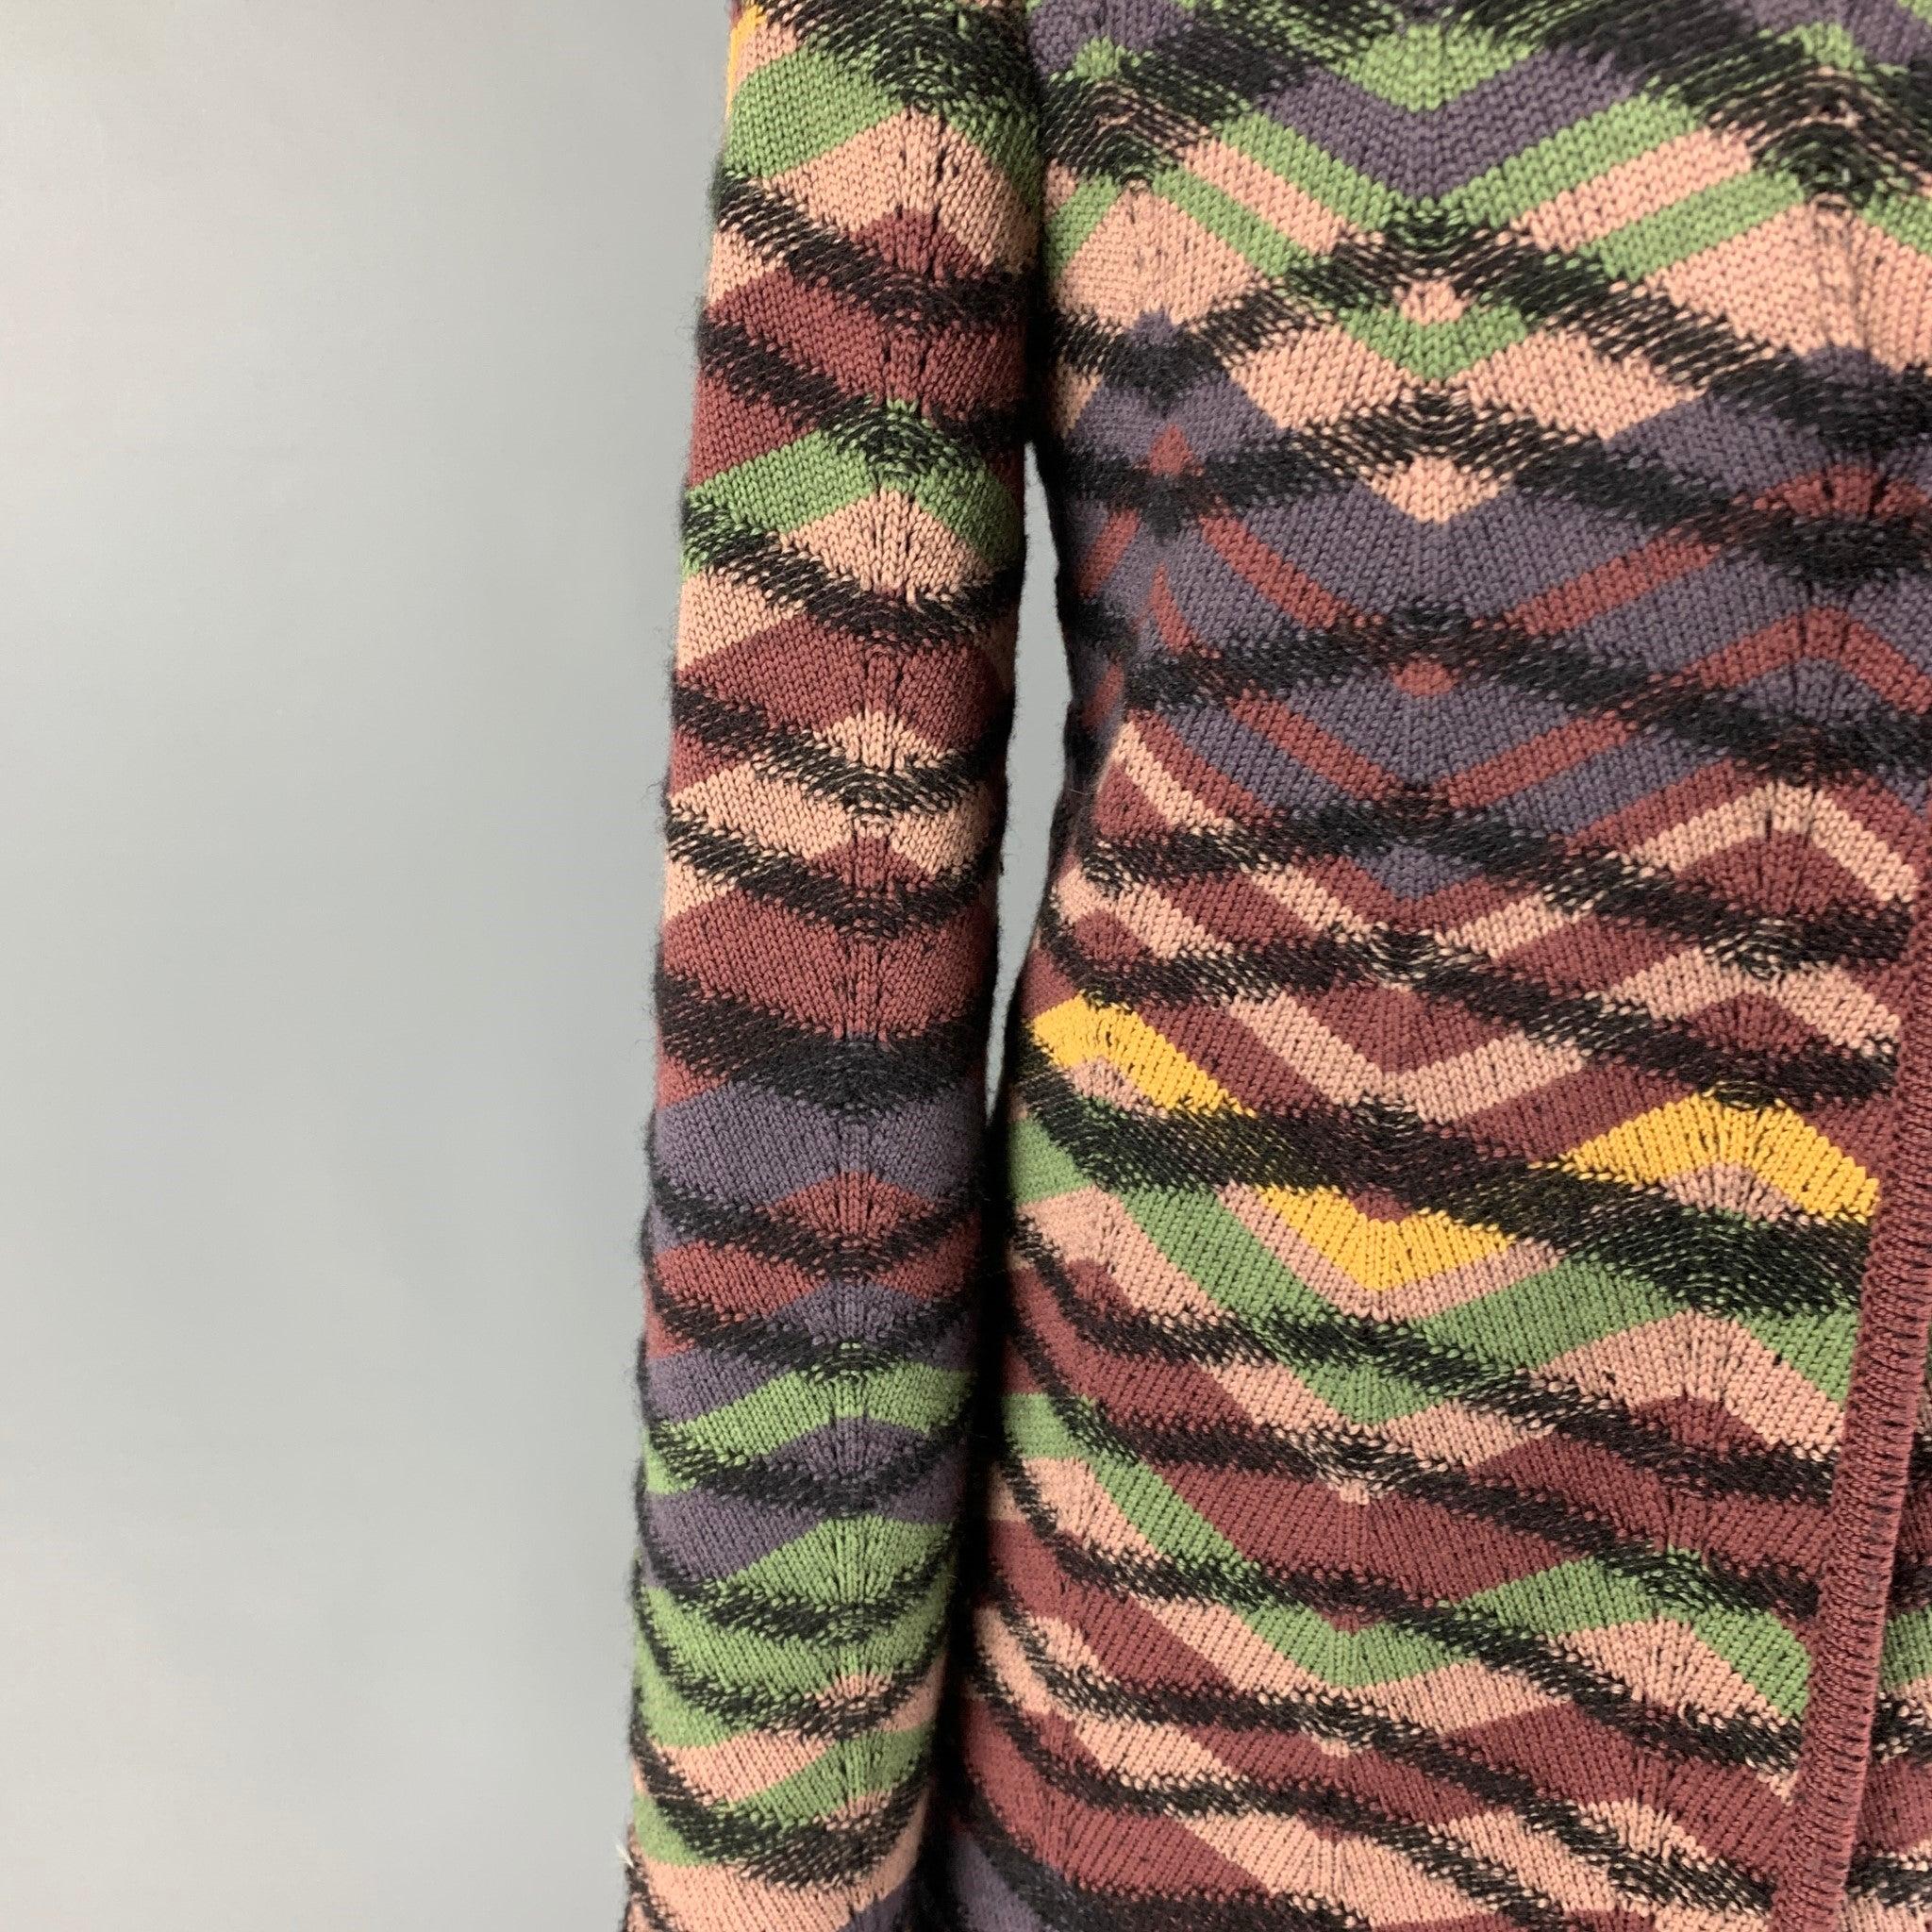 M by MISSONI coat comes in a multi-color knitted wool featuring a collarless style, long sleeves, and a snap button closure. Made in Italy.
Excellent
Pre-Owned Condition. 

Marked:  42 

Measurements: 
 
Shoulder:
16.5 inches Bust: 36 inches Sleeve: